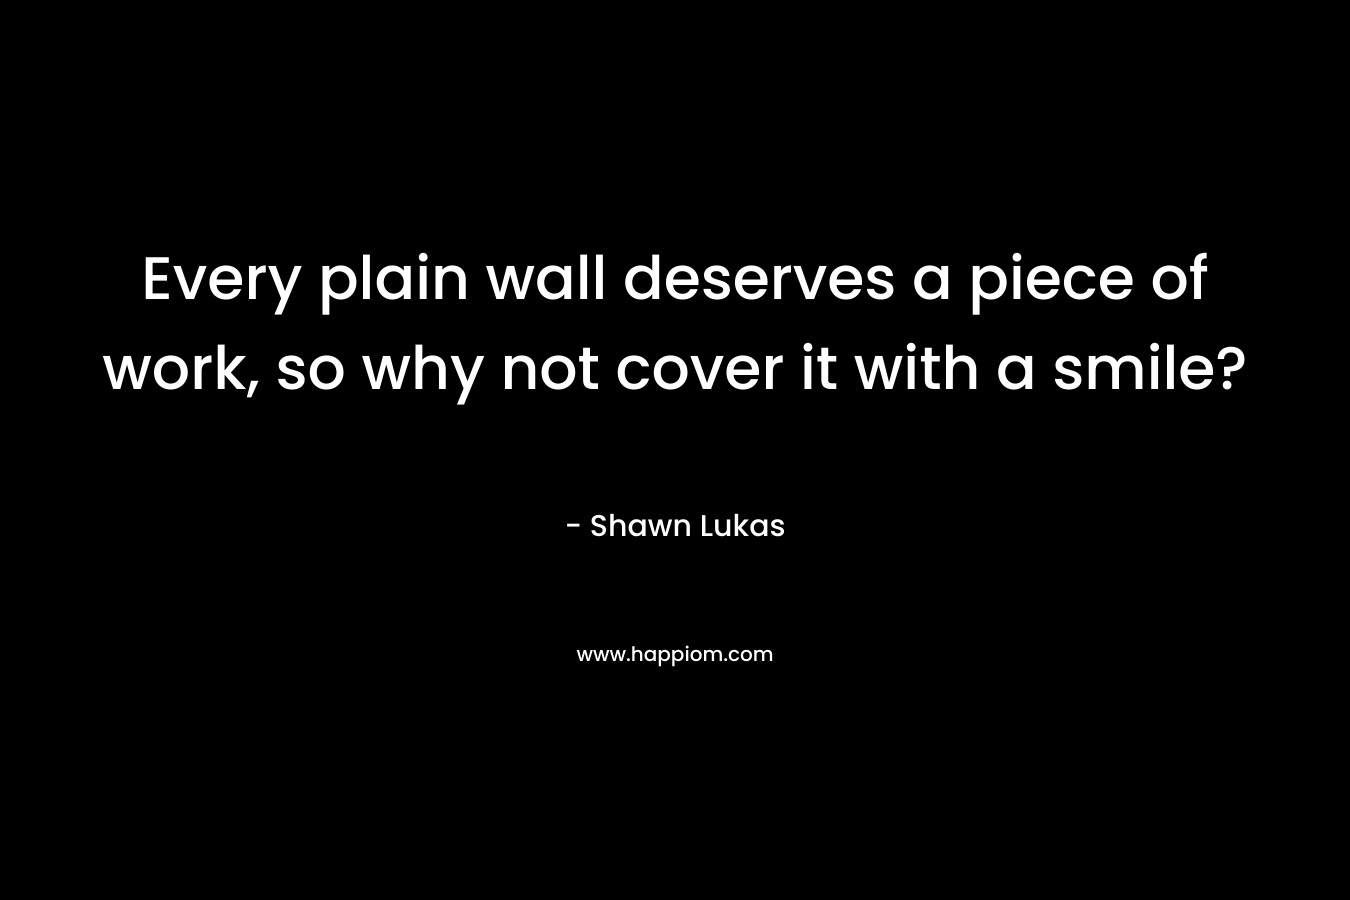 Every plain wall deserves a piece of work, so why not cover it with a smile? – Shawn Lukas